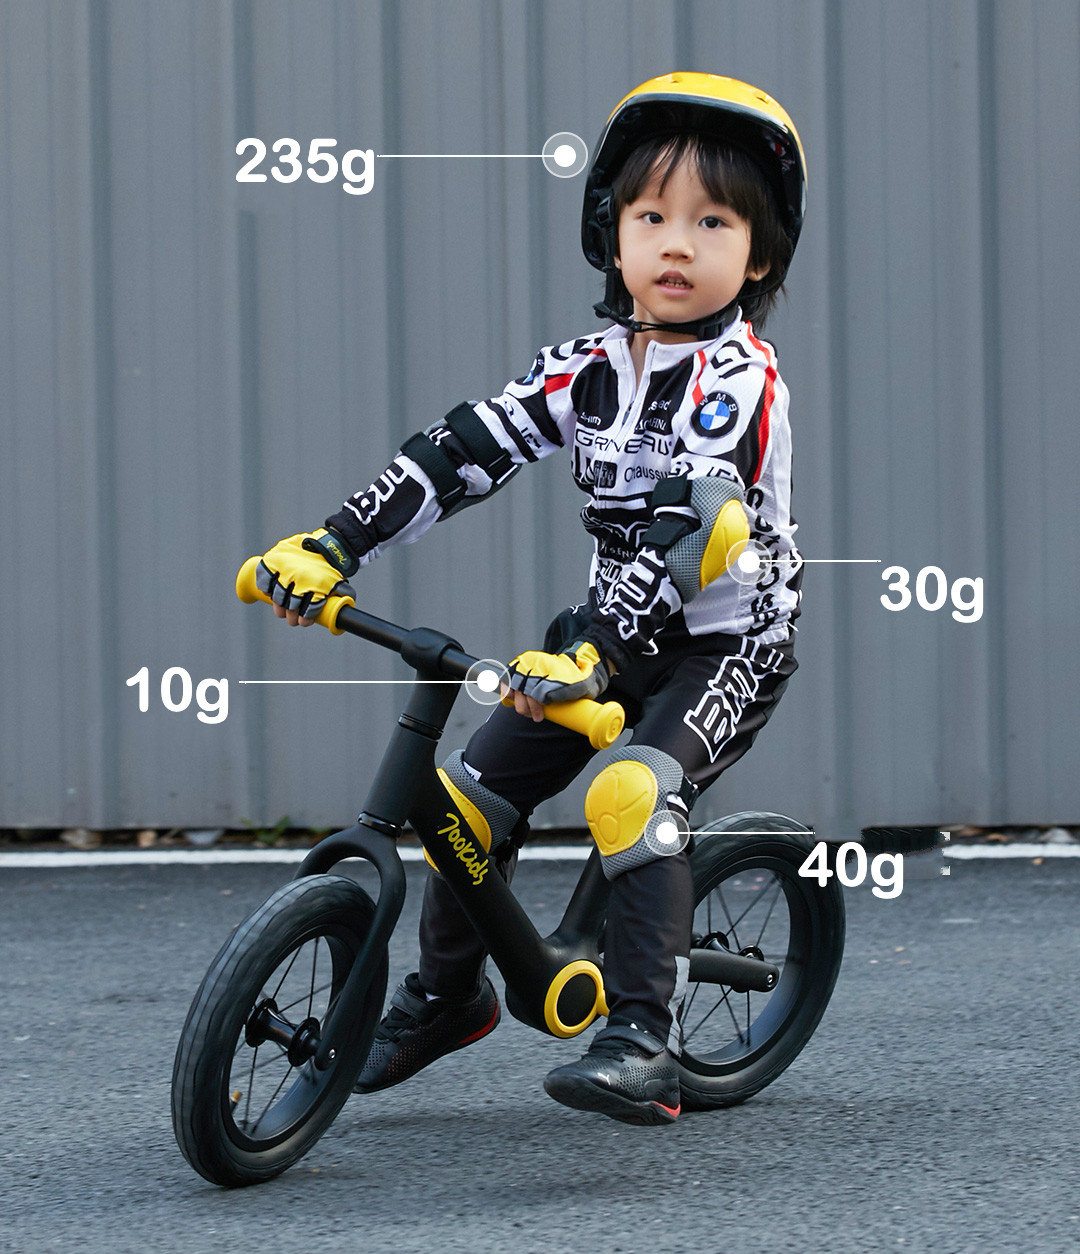 7 Set Kids Sport Protective Gear Safety Helmet Knee Wrist Elbow Pads For Cycling 